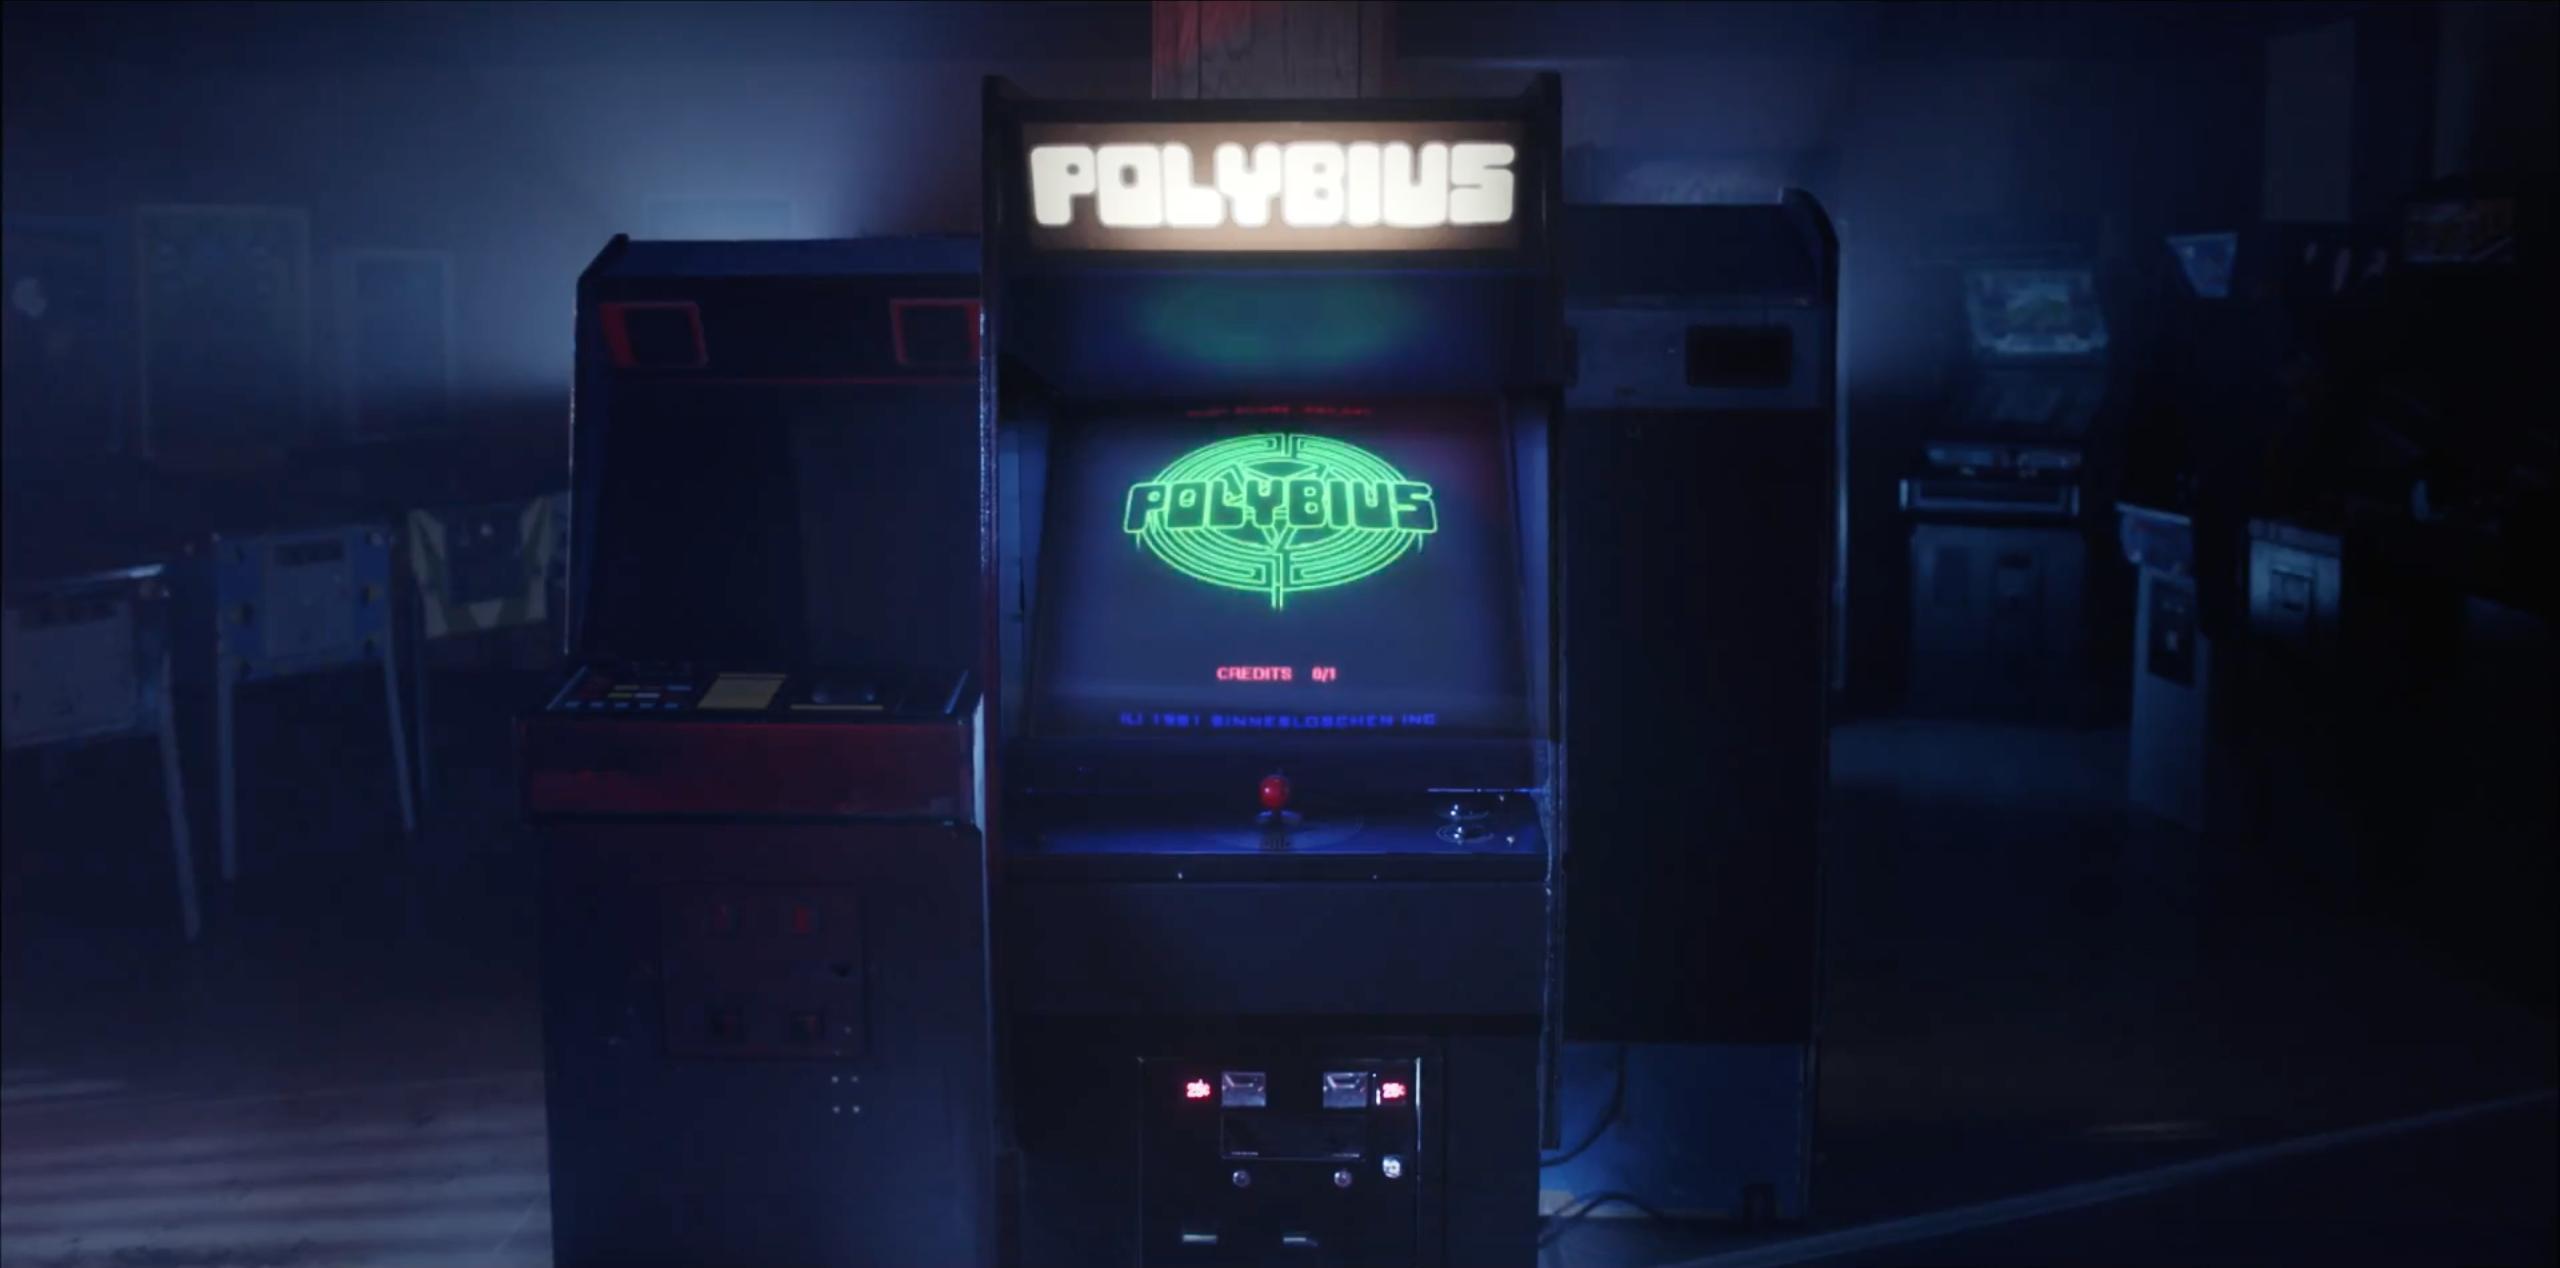 Polybius: The Arcade Game That Never Existed